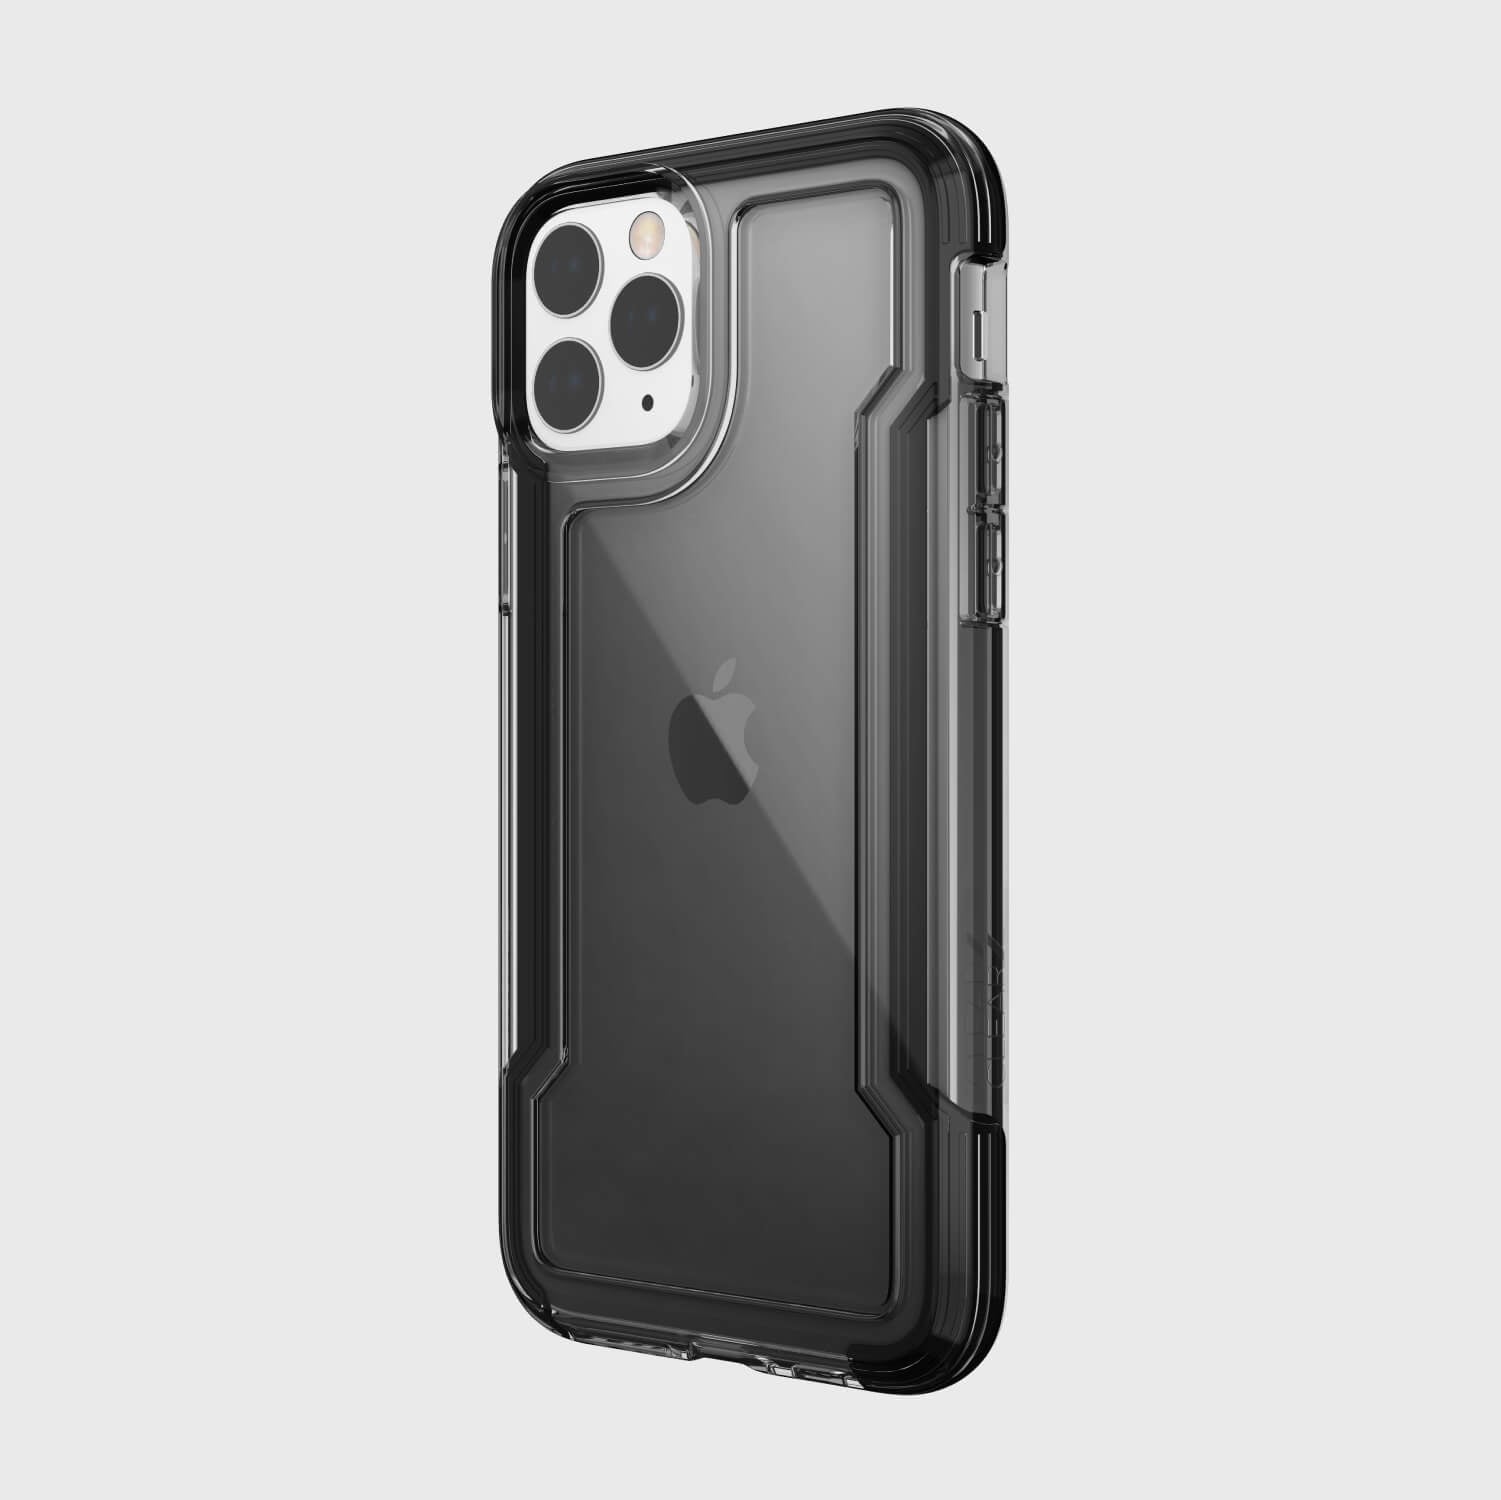 The Raptic Clear iPhone 11 Pro Max Case offers drop protection in black.